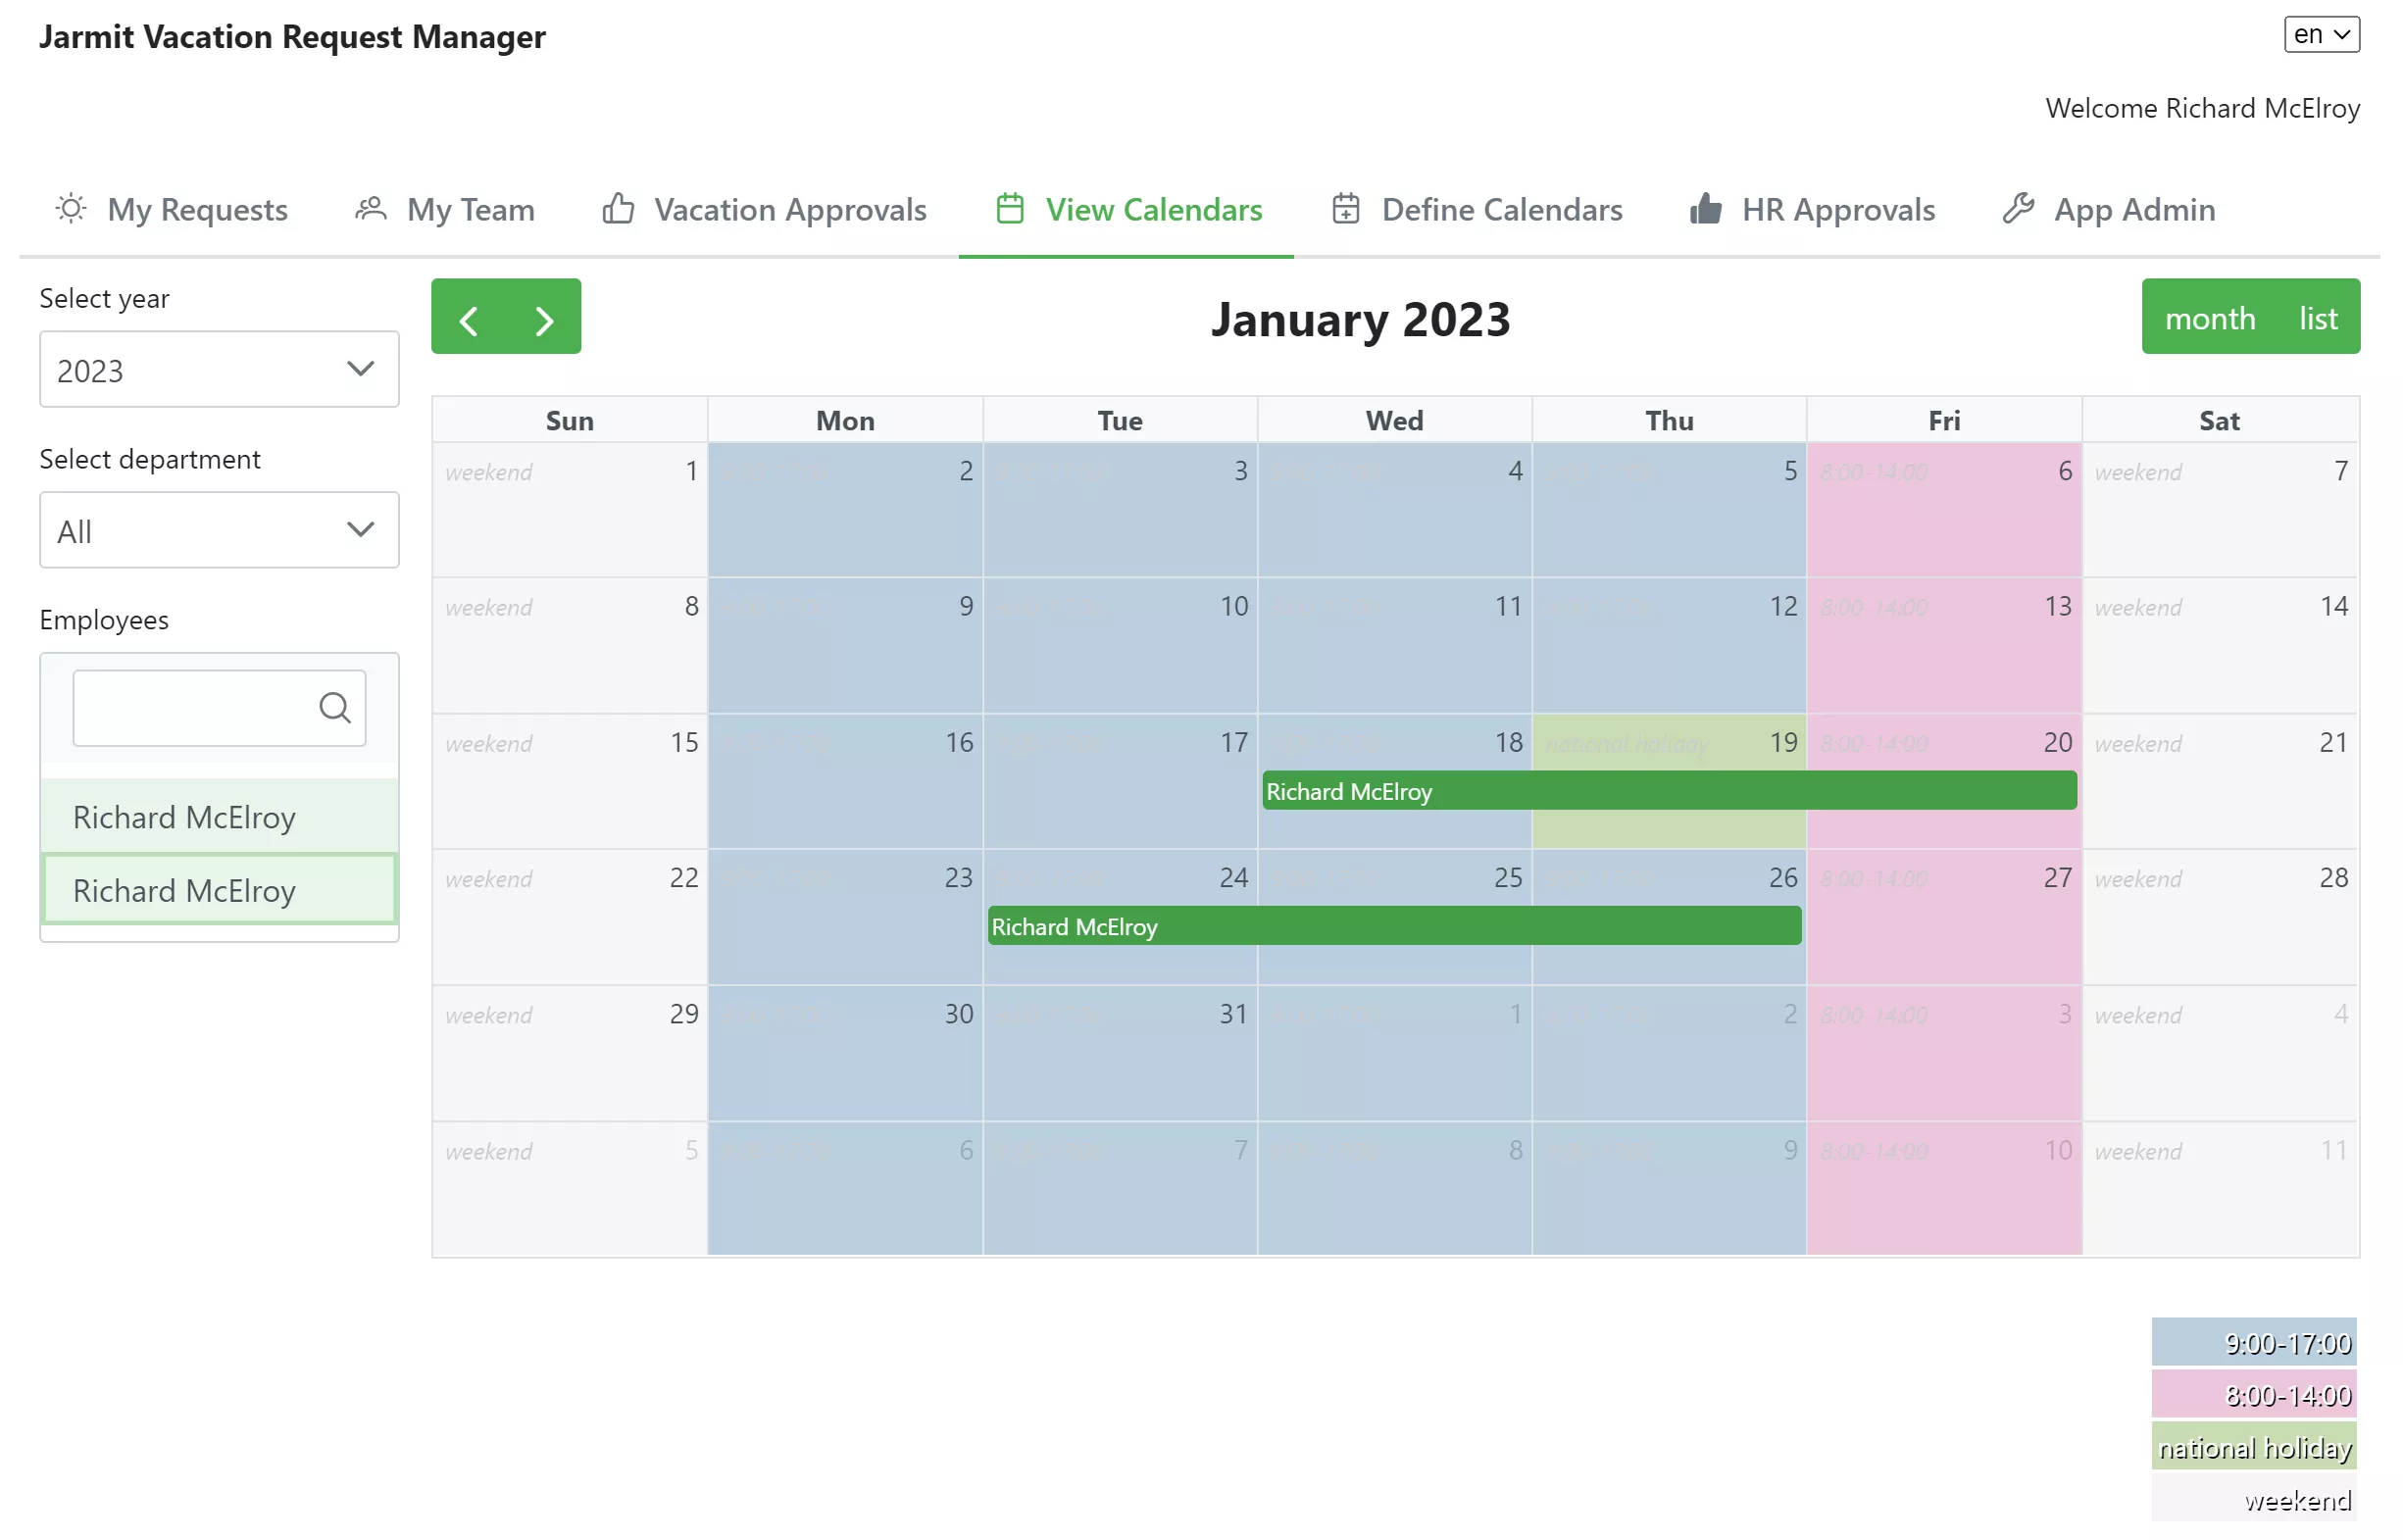 Jarmit Vacation Request Manager - HR Users calendars